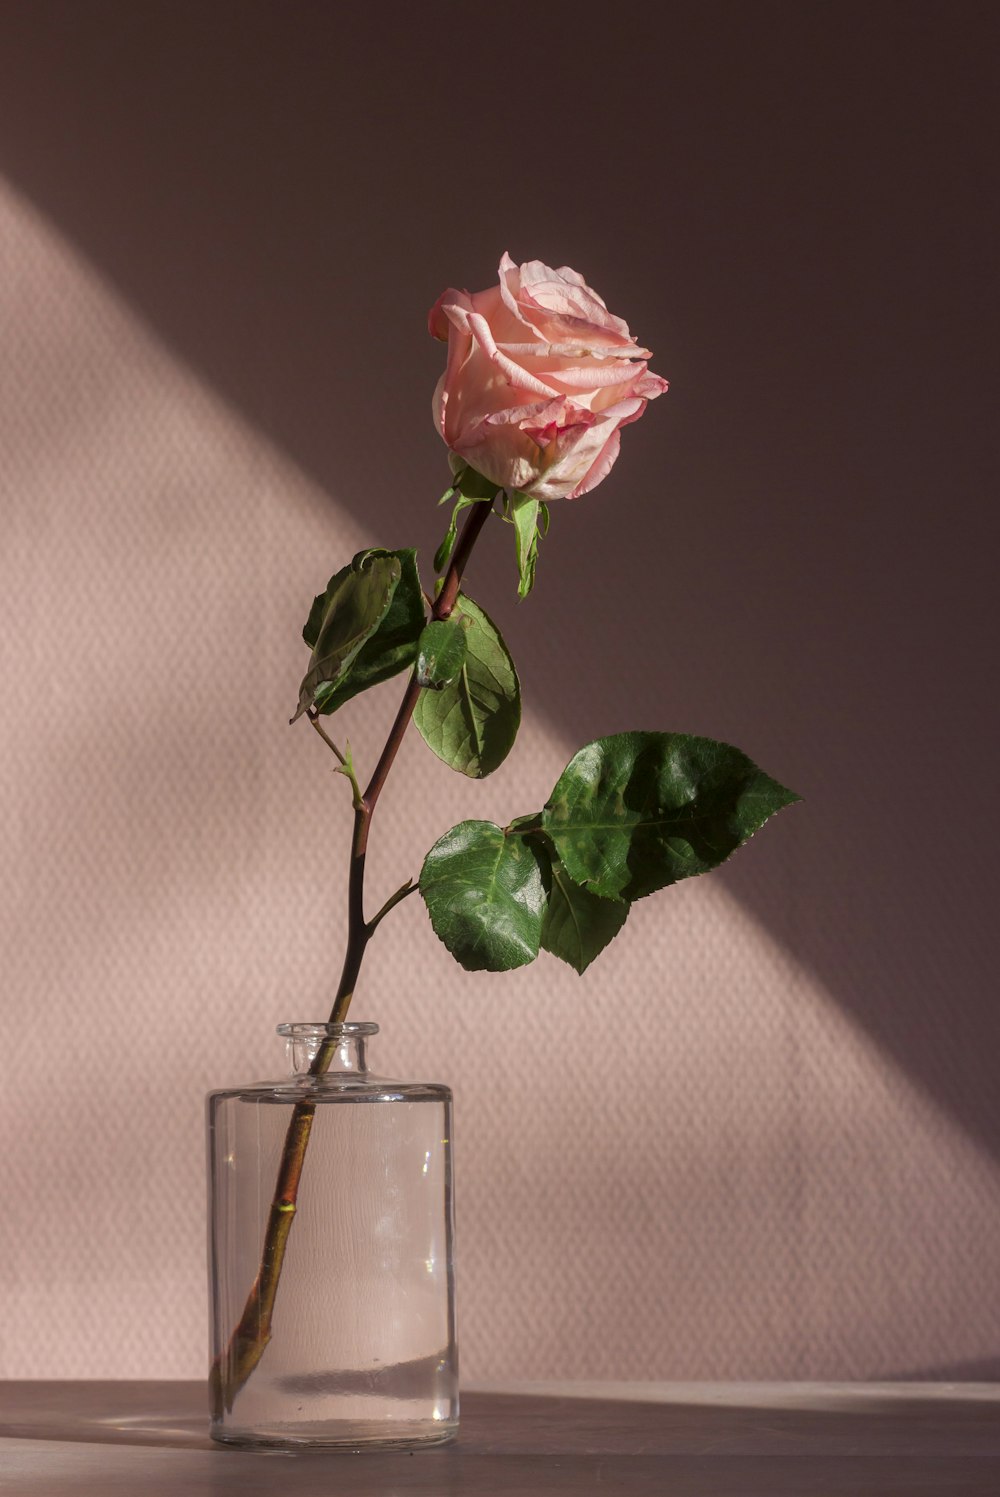 Rose Aesthetic Pictures | Download Free Images on Unsplash